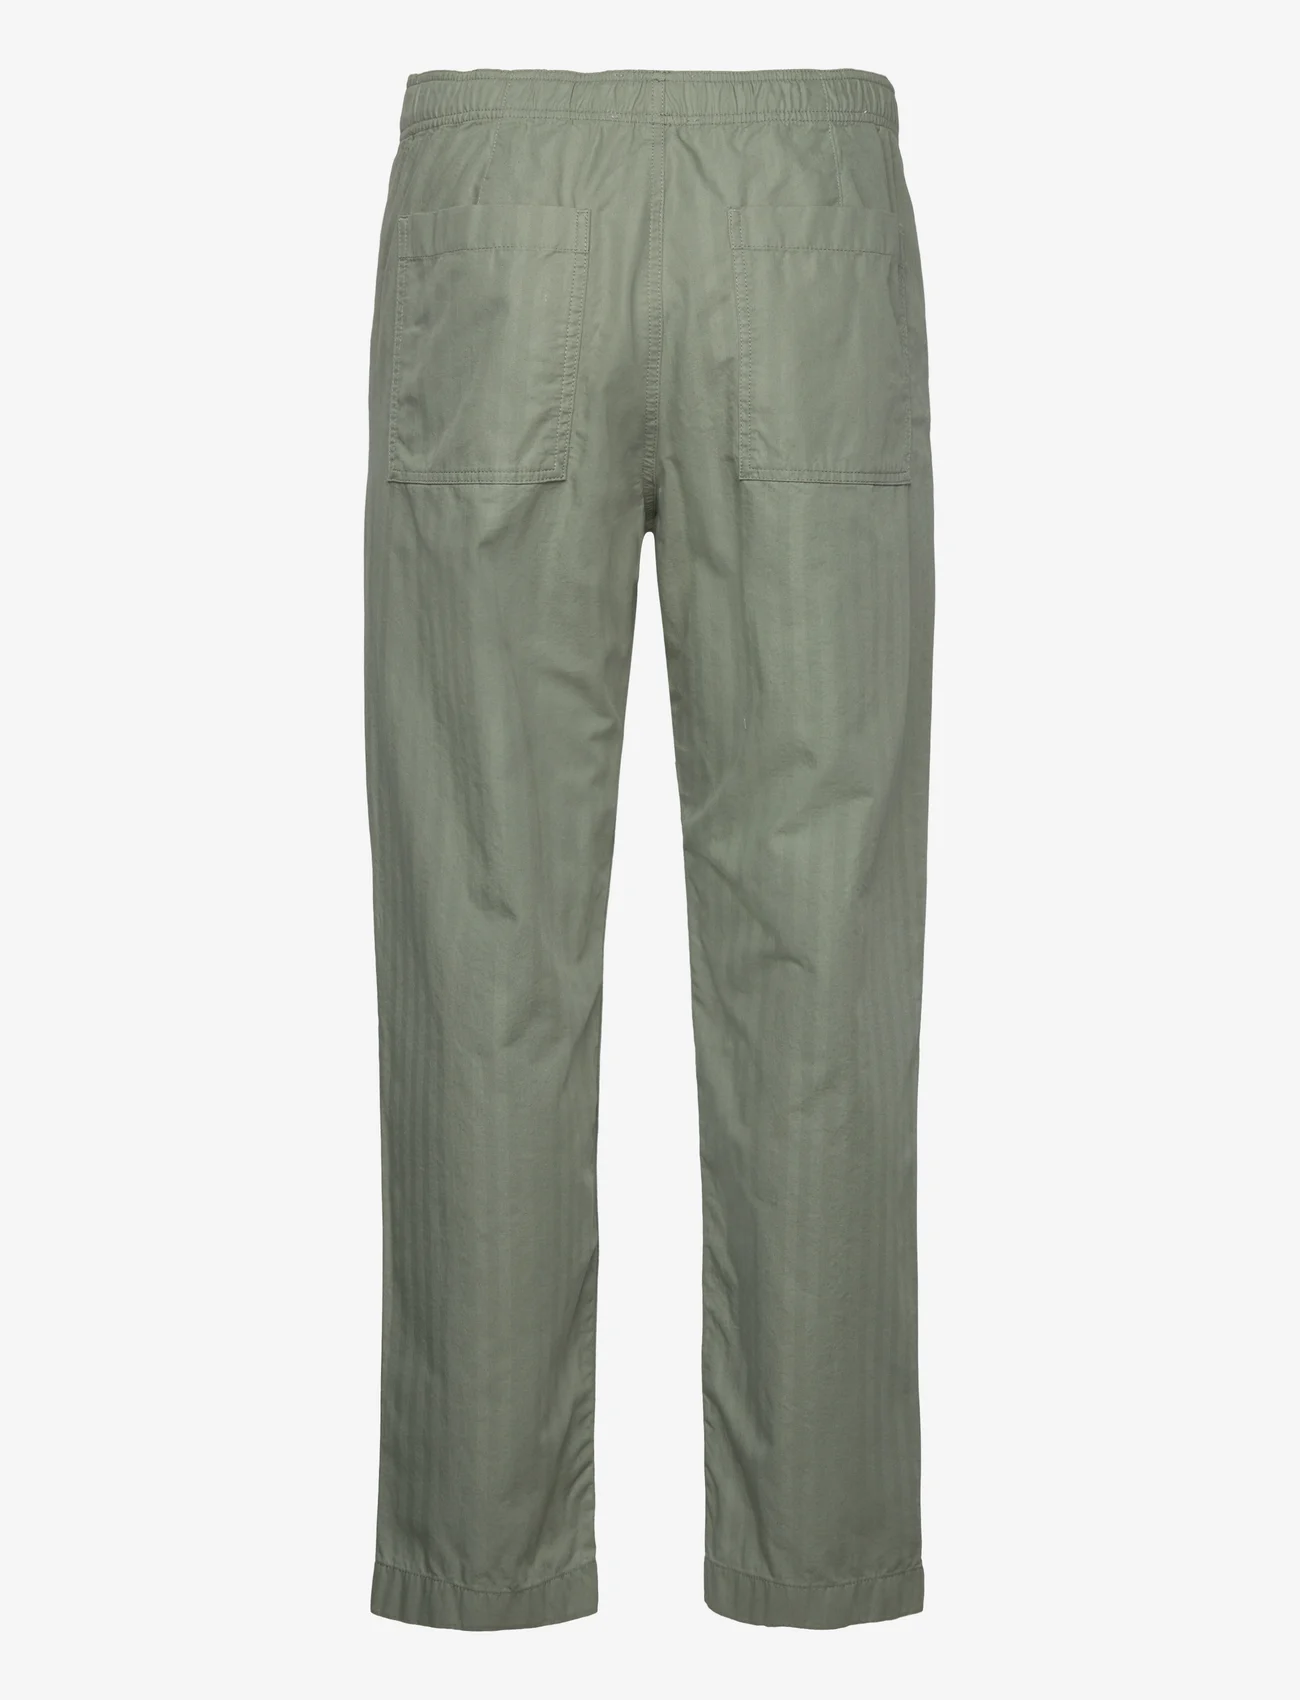 Double A by Wood Wood - Lee herringbone trousers - casual trousers - olive - 1